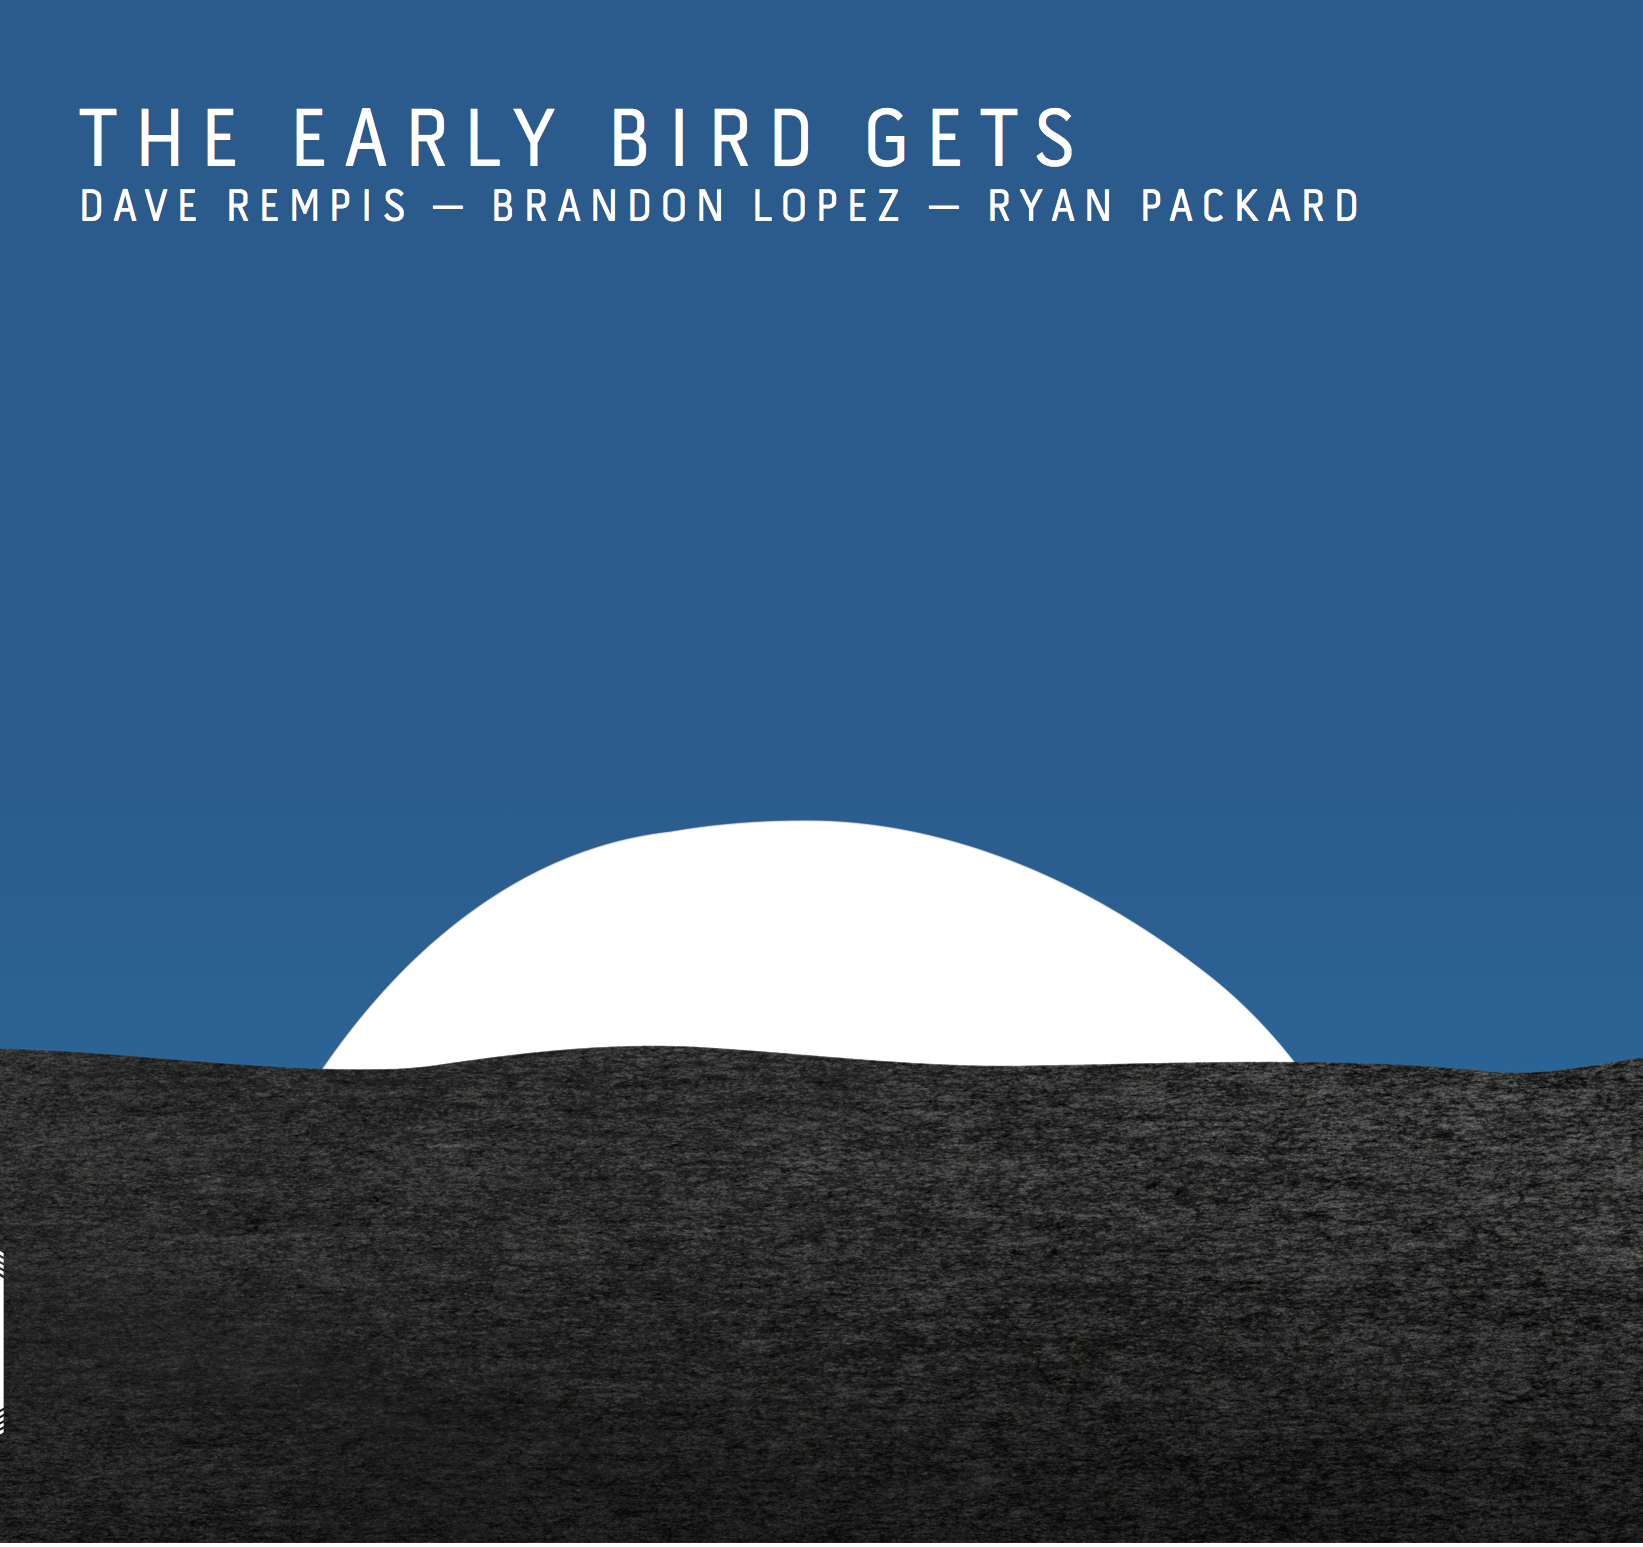 The Early Bird Gets - 2019